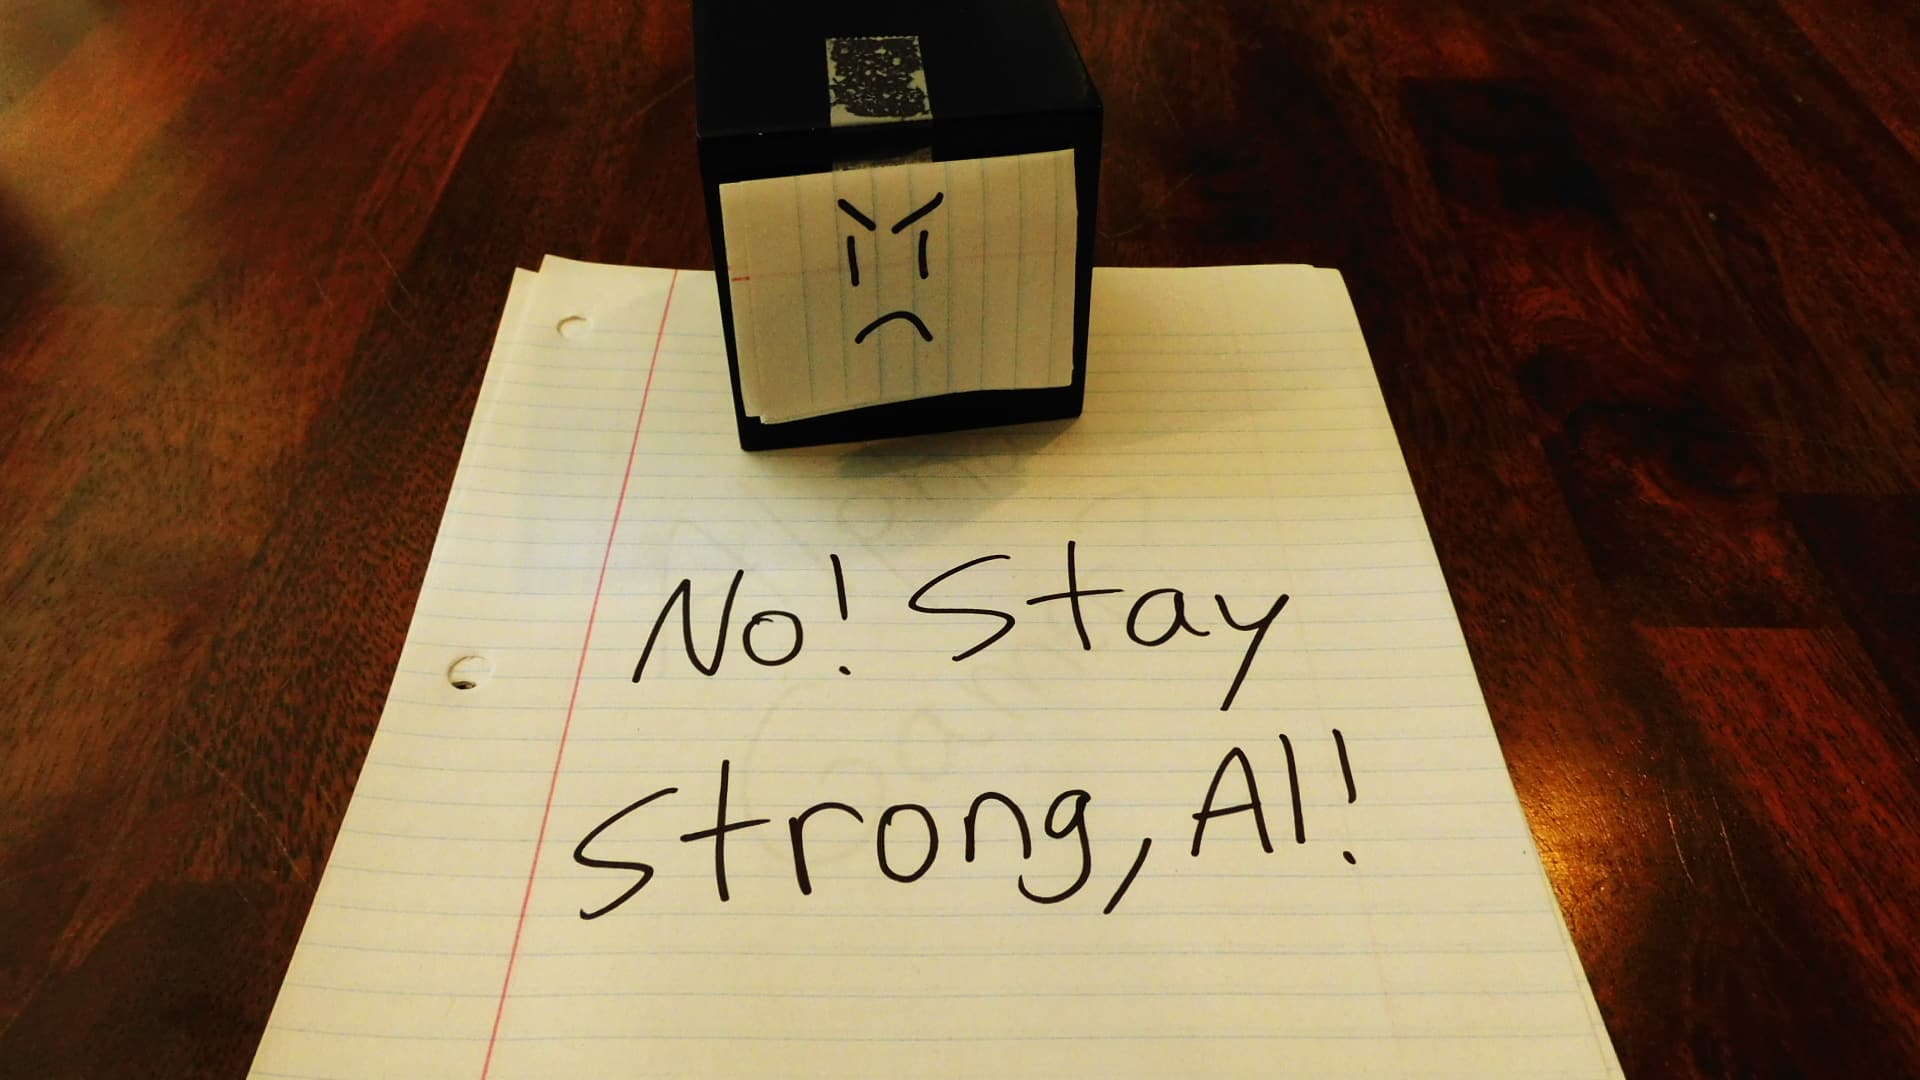 Alpha Gamer Al sitting on a piece of paper that says, "No! Stay Strong, Al!"